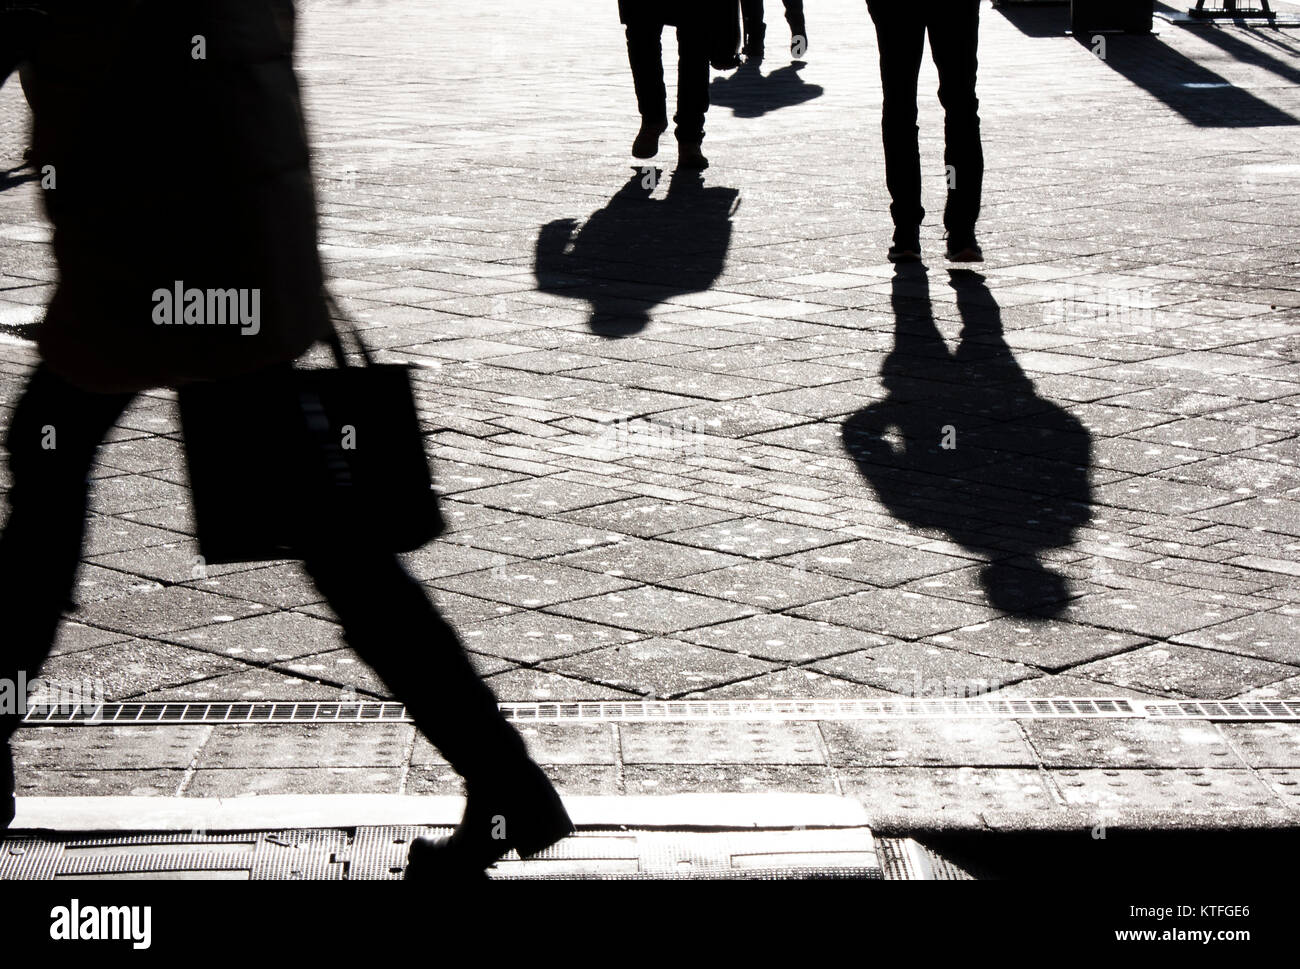 People silhouettes and shadows on city streets in black and white Stock Photo